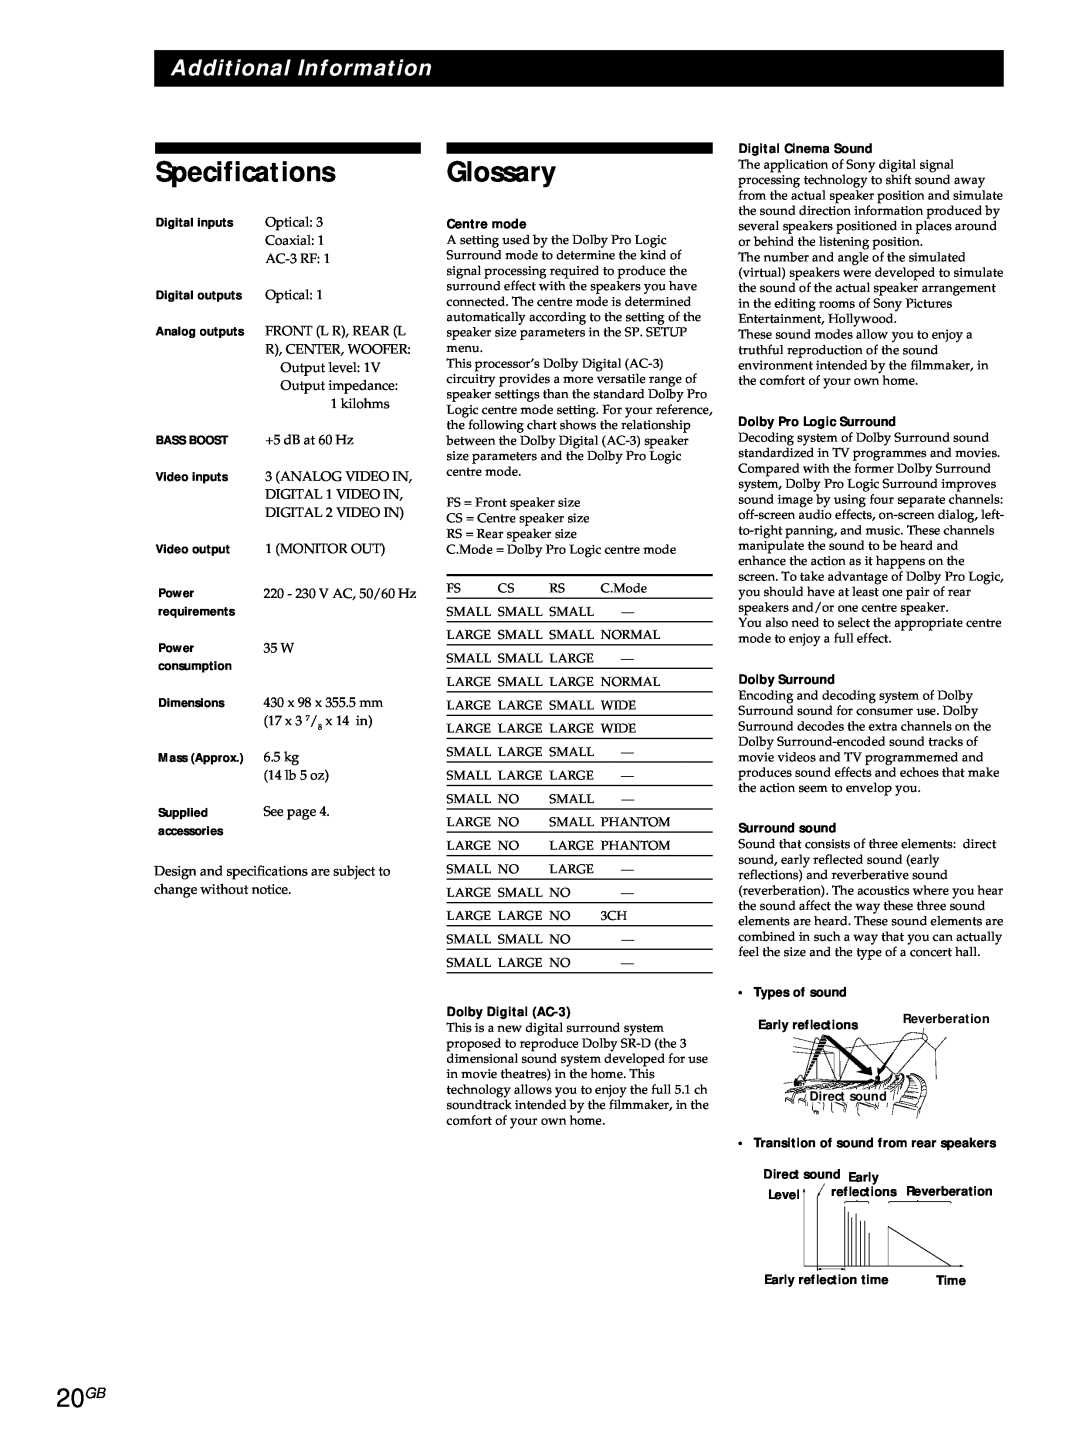 Sony SDP-E800 operating instructions Specifications Glossary, 20GB, Additional Information 